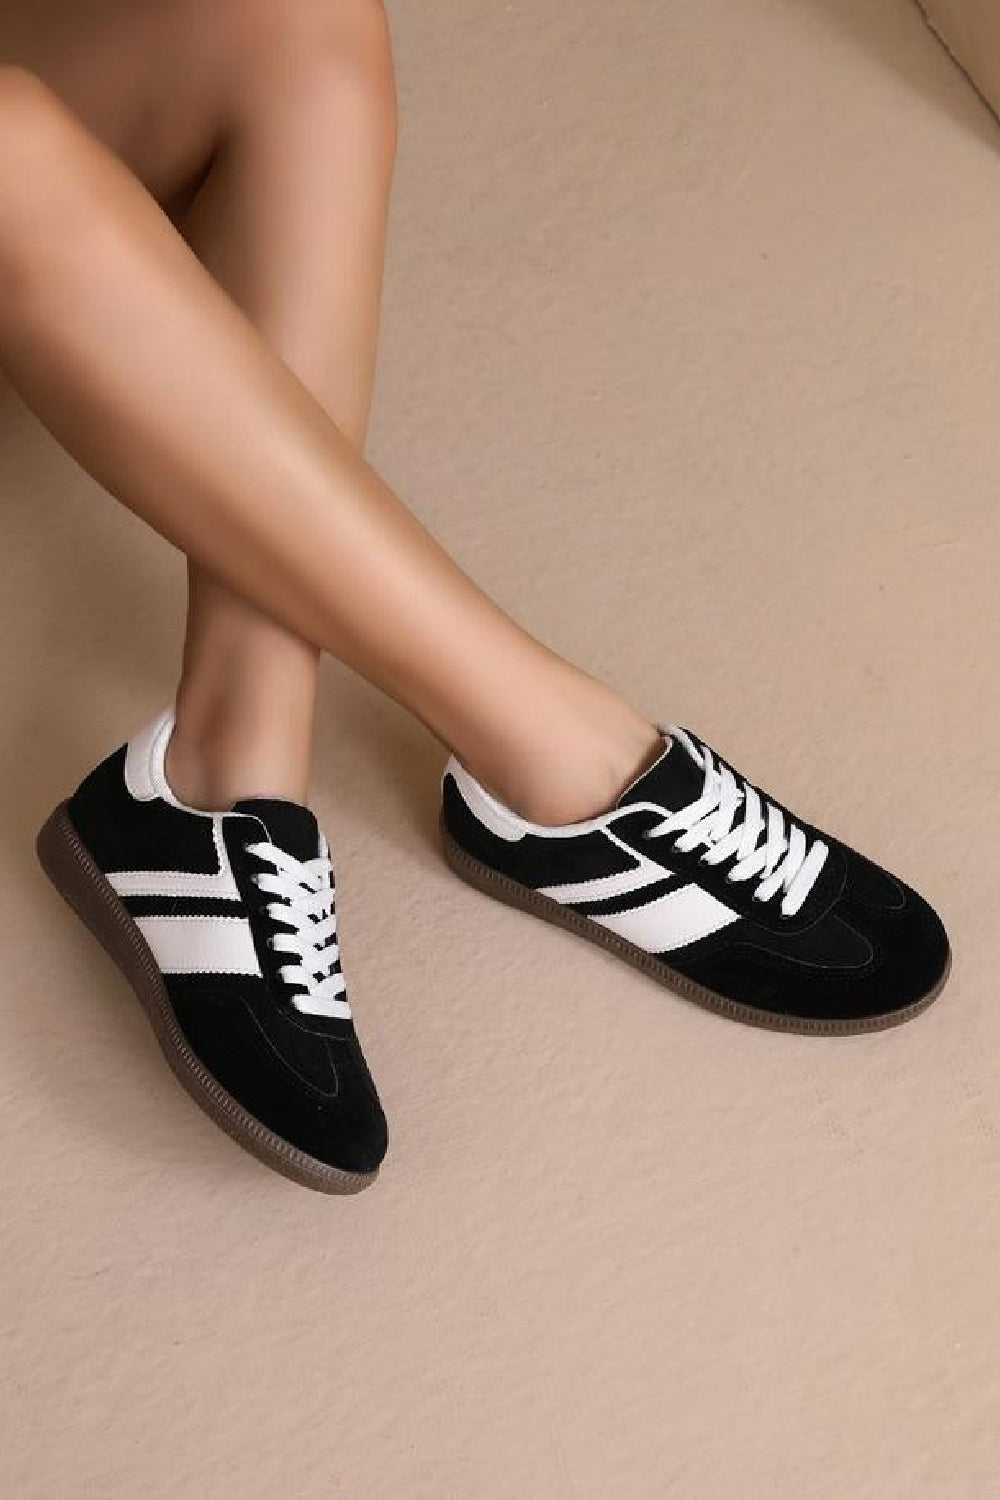 BLACK WHITE STRIPED FLAT LACE UP STYLISH SNEAKERS TRAINERS